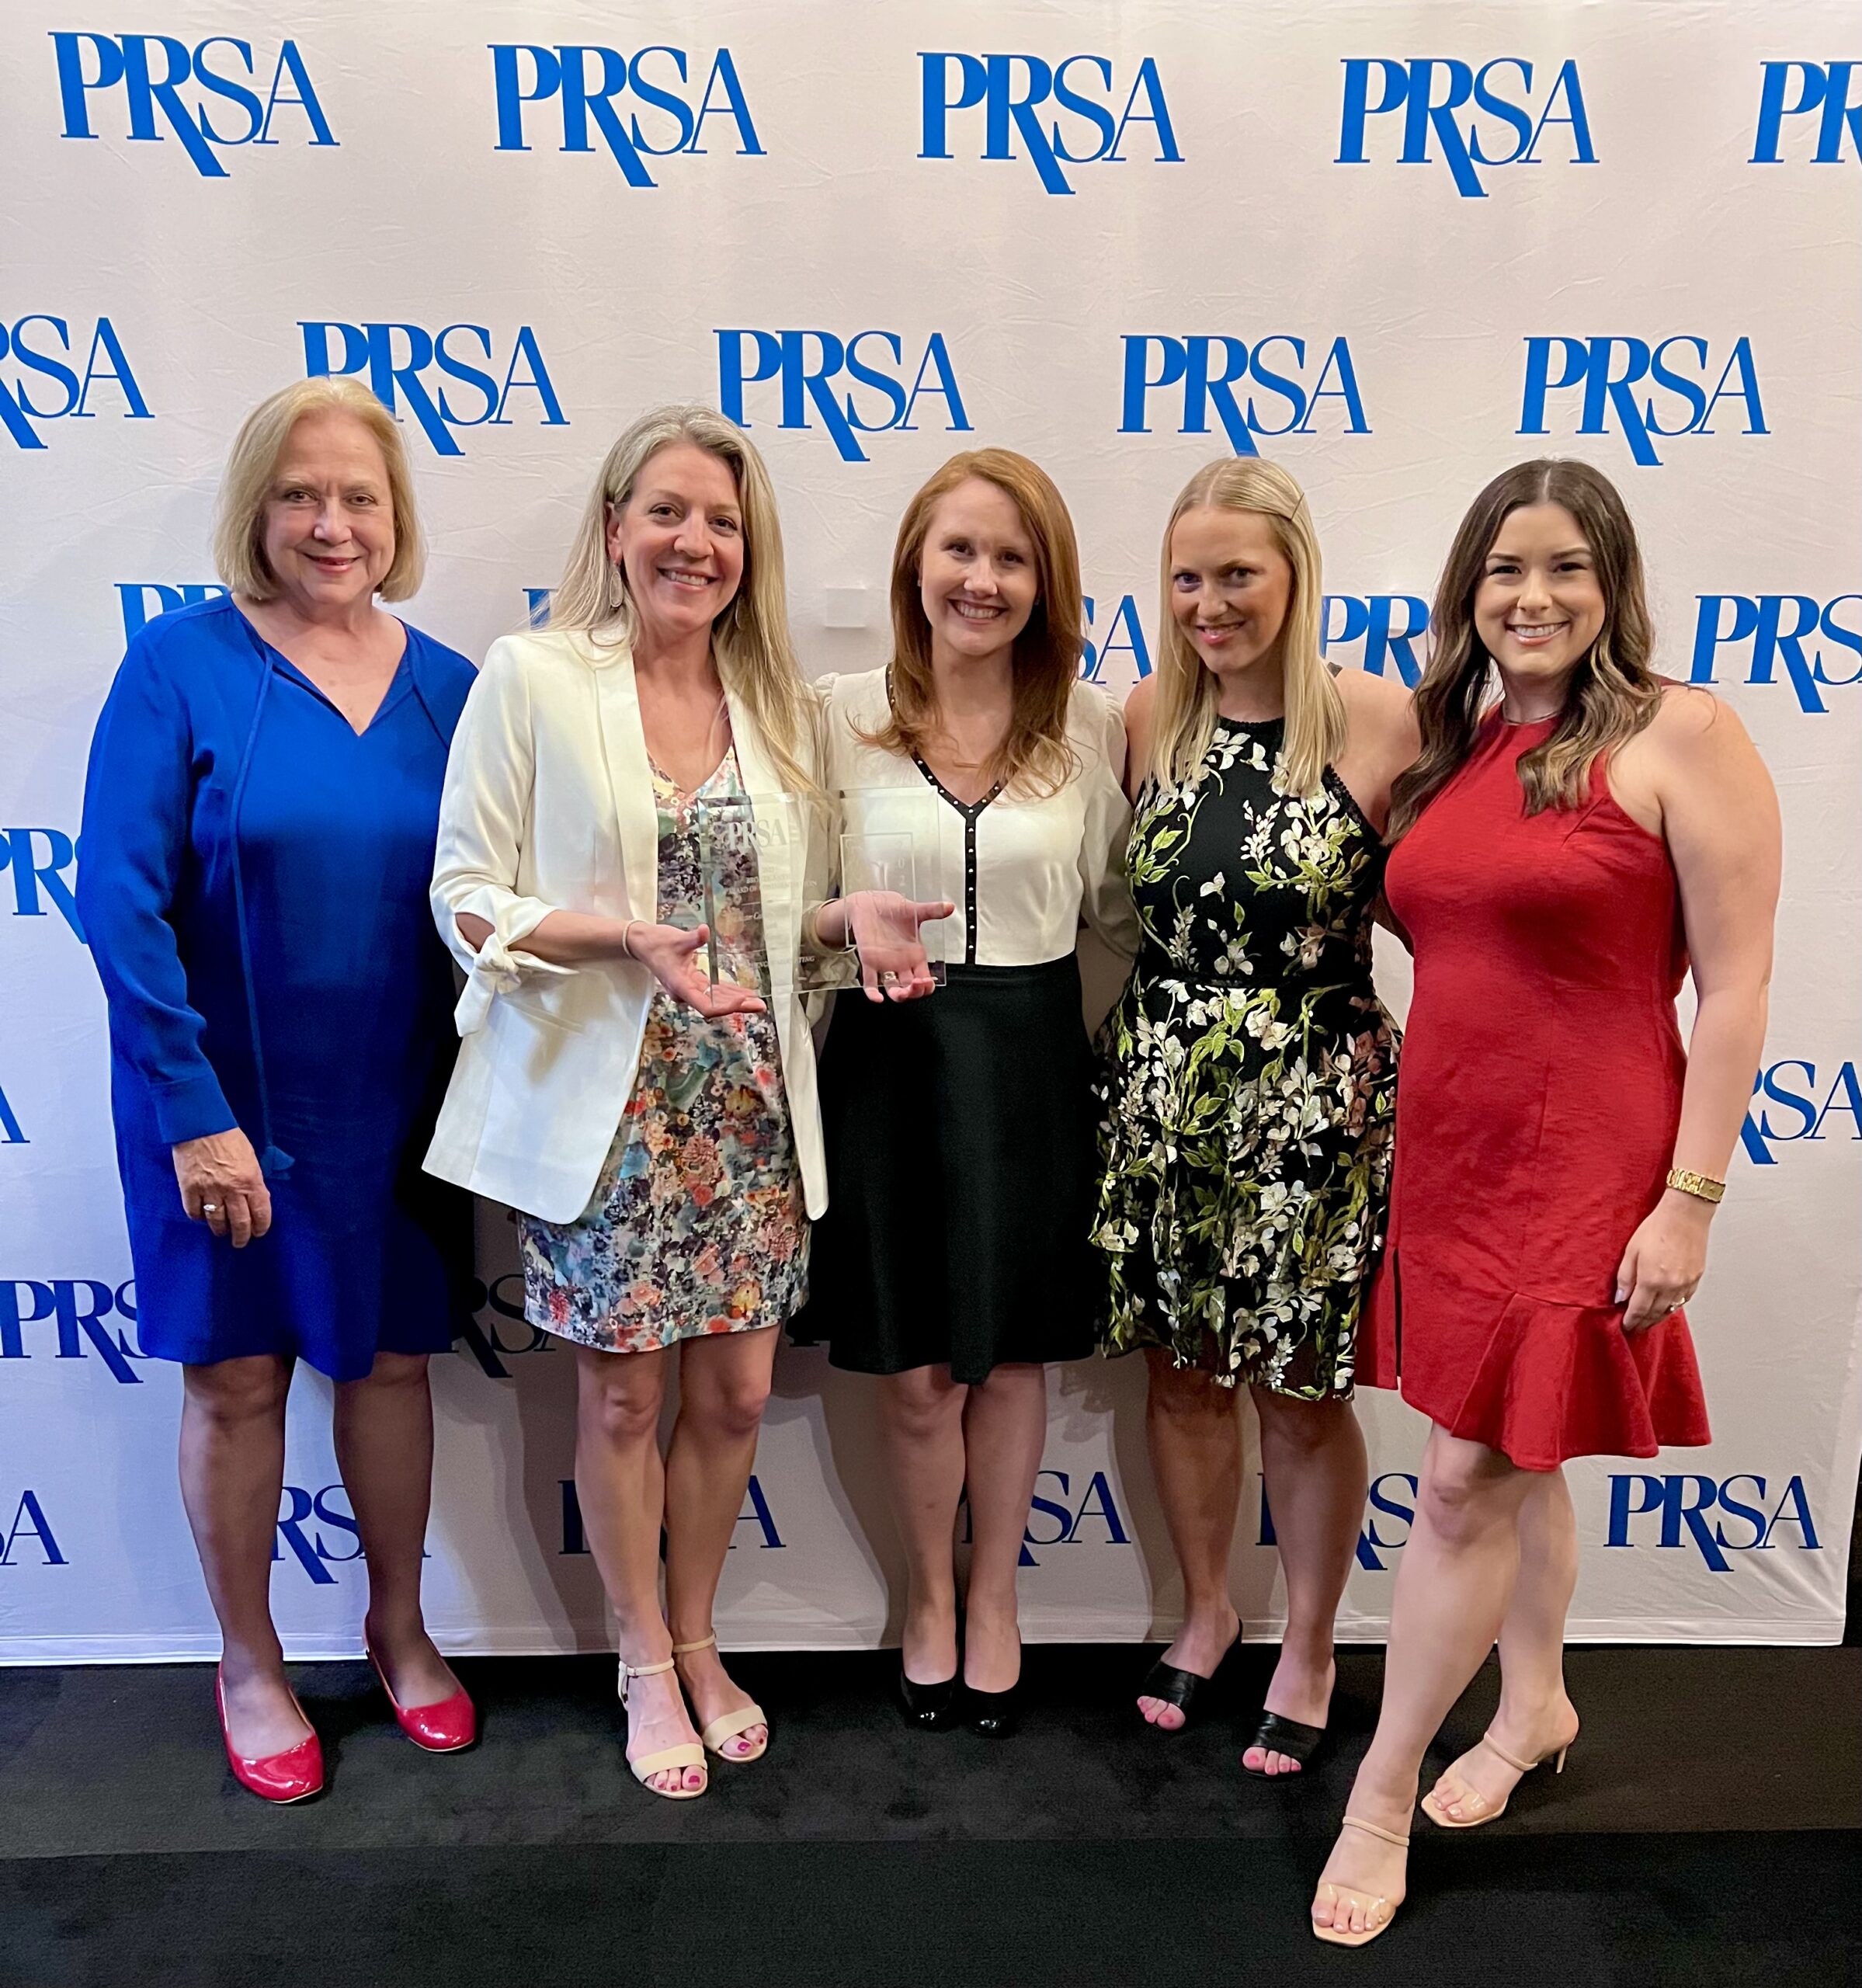 Five women standing in front of a PRSA-brand banner holding an award.